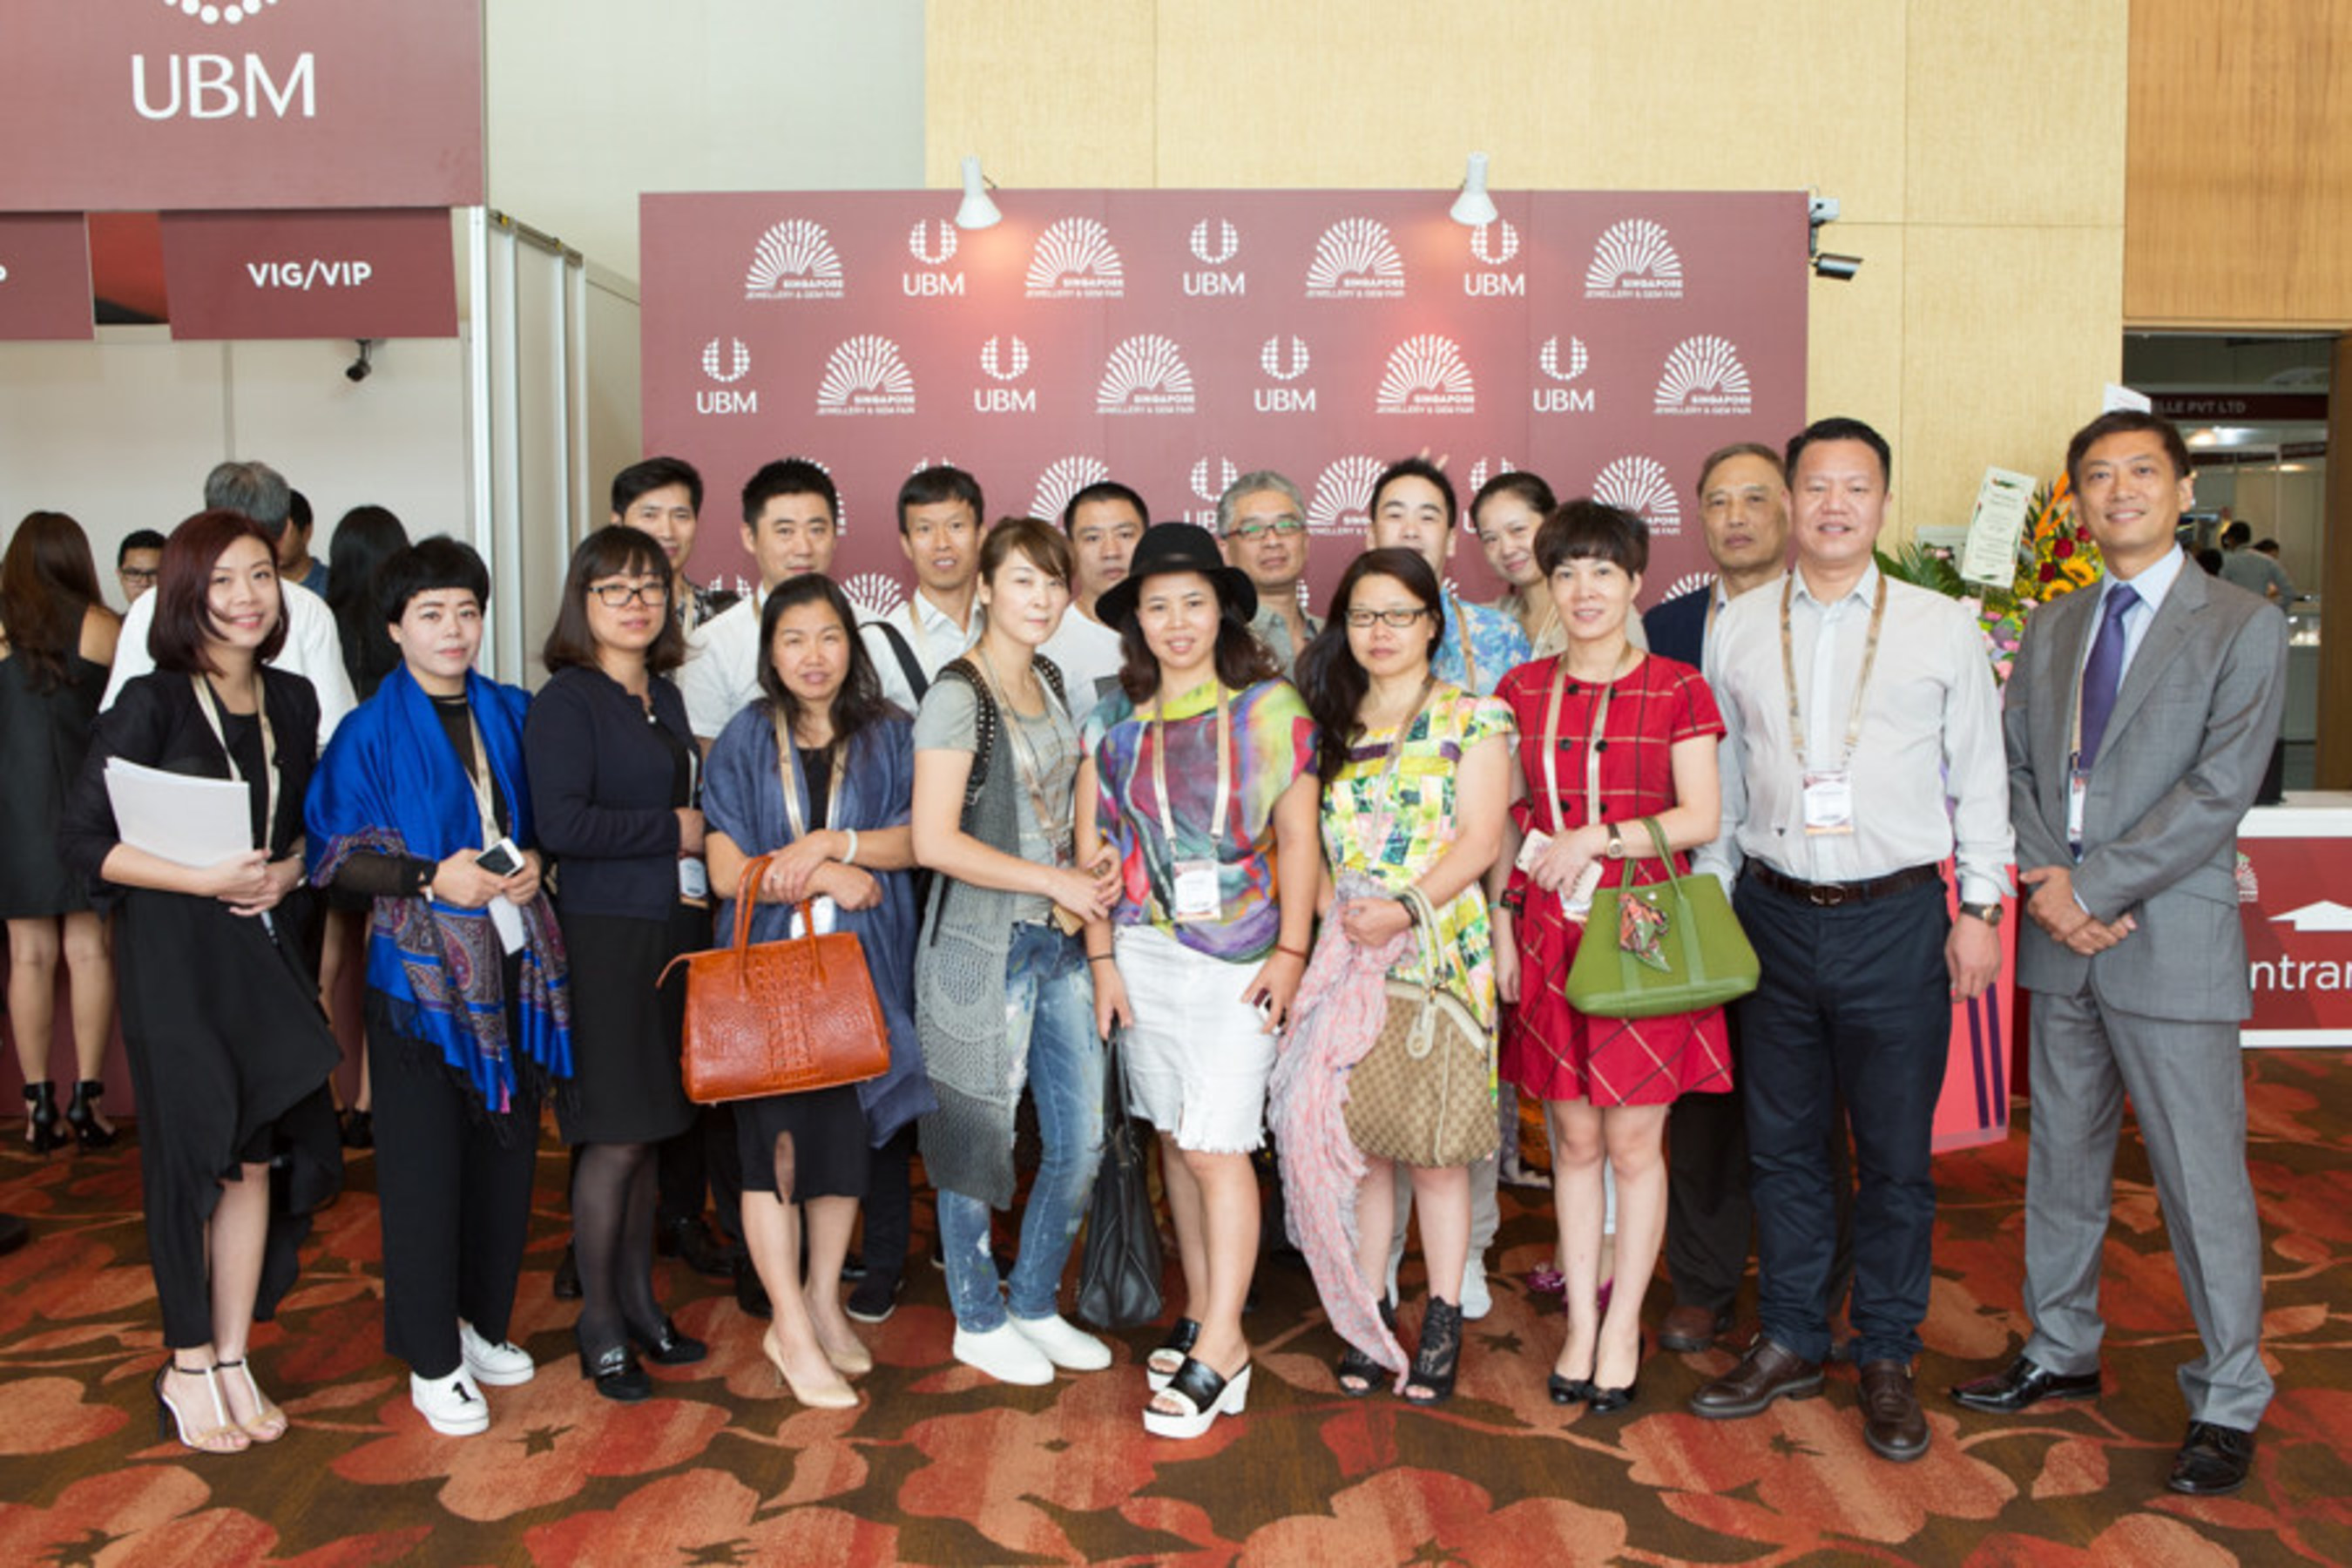 Welcomed notable trade buyers from Australia, China, Indonesia, Malaysia, Singapore and the world over.